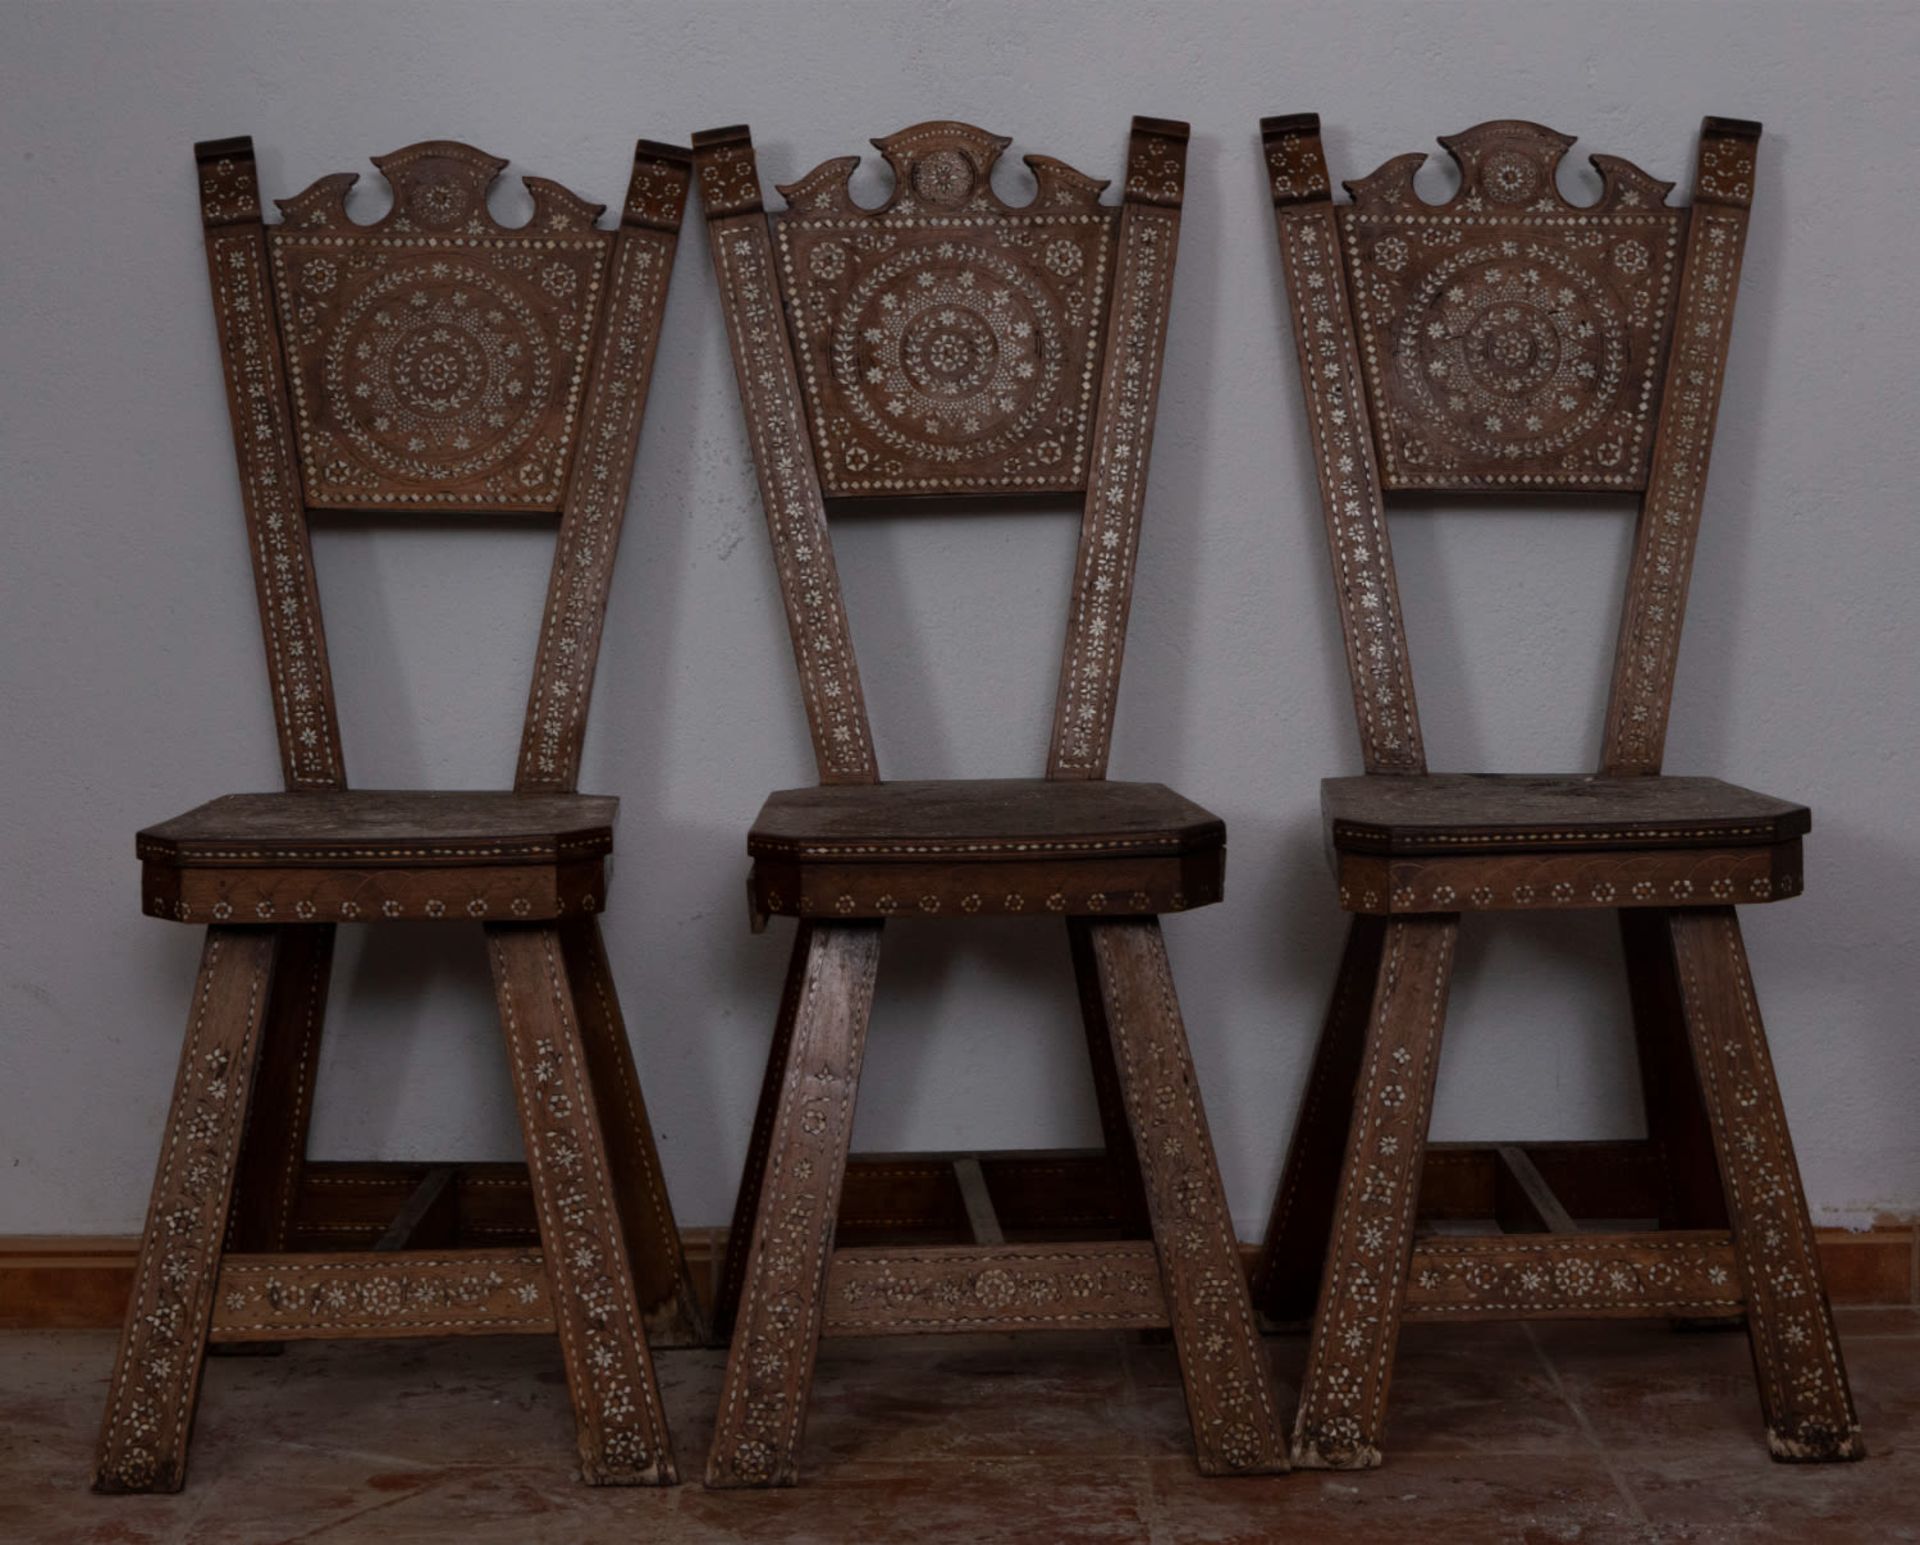 Lot of six chairs with bone inlays with geometric and floral decoration, 19th century - Bild 3 aus 4